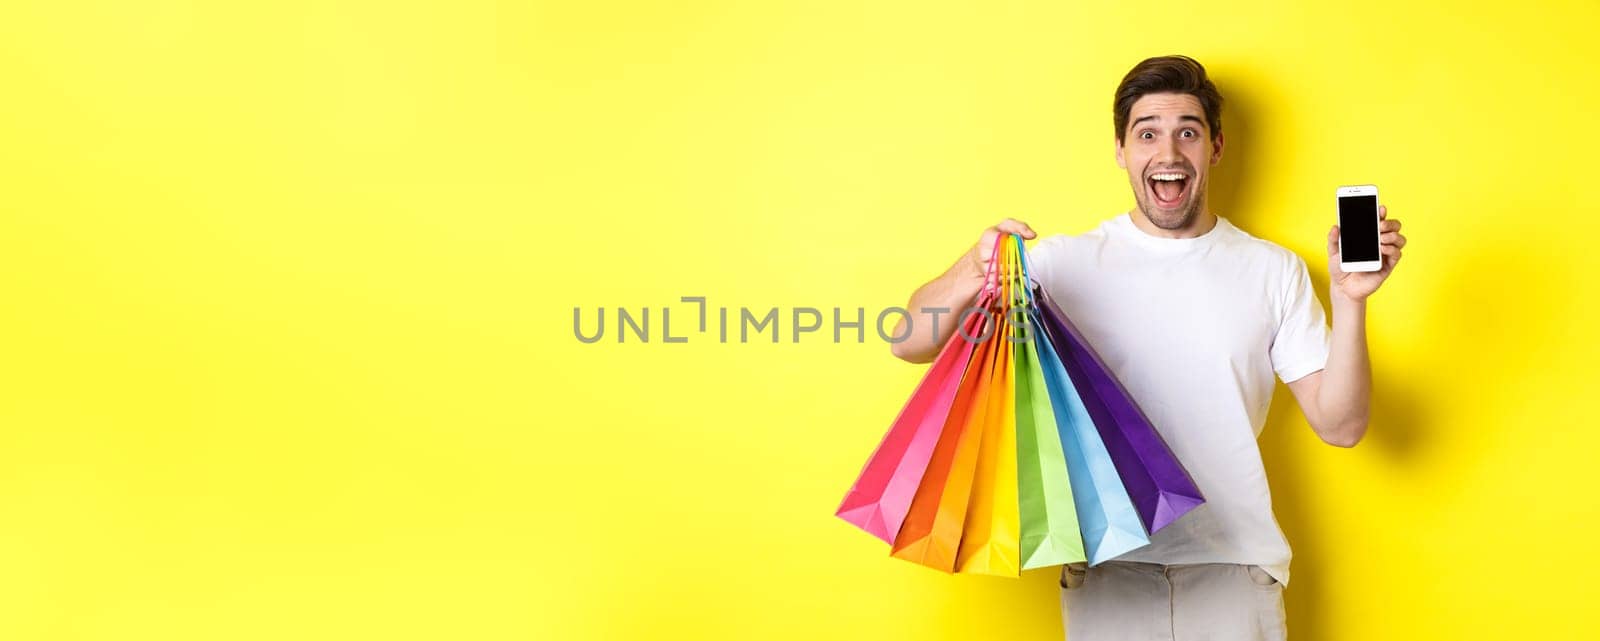 Young man holding shopping bags and showing mobile phone screen, money application, standing over yellow background.